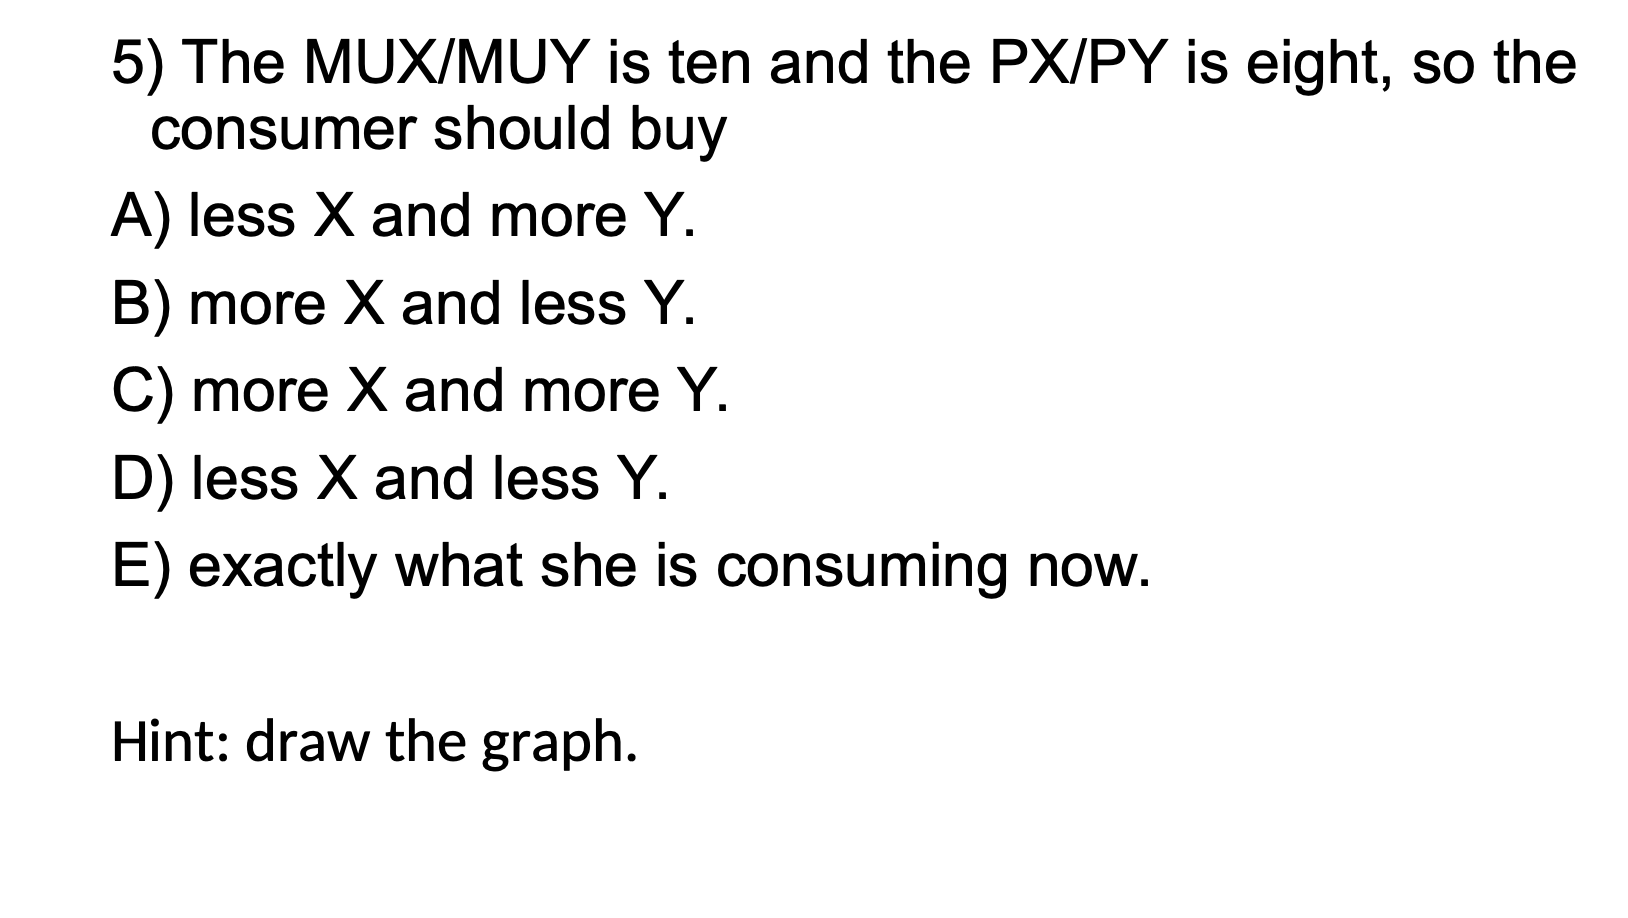 5) The MUX/MUY is ten and the PX/PY is eight, so the consumer should buy A) less X and more Y. B) more X and